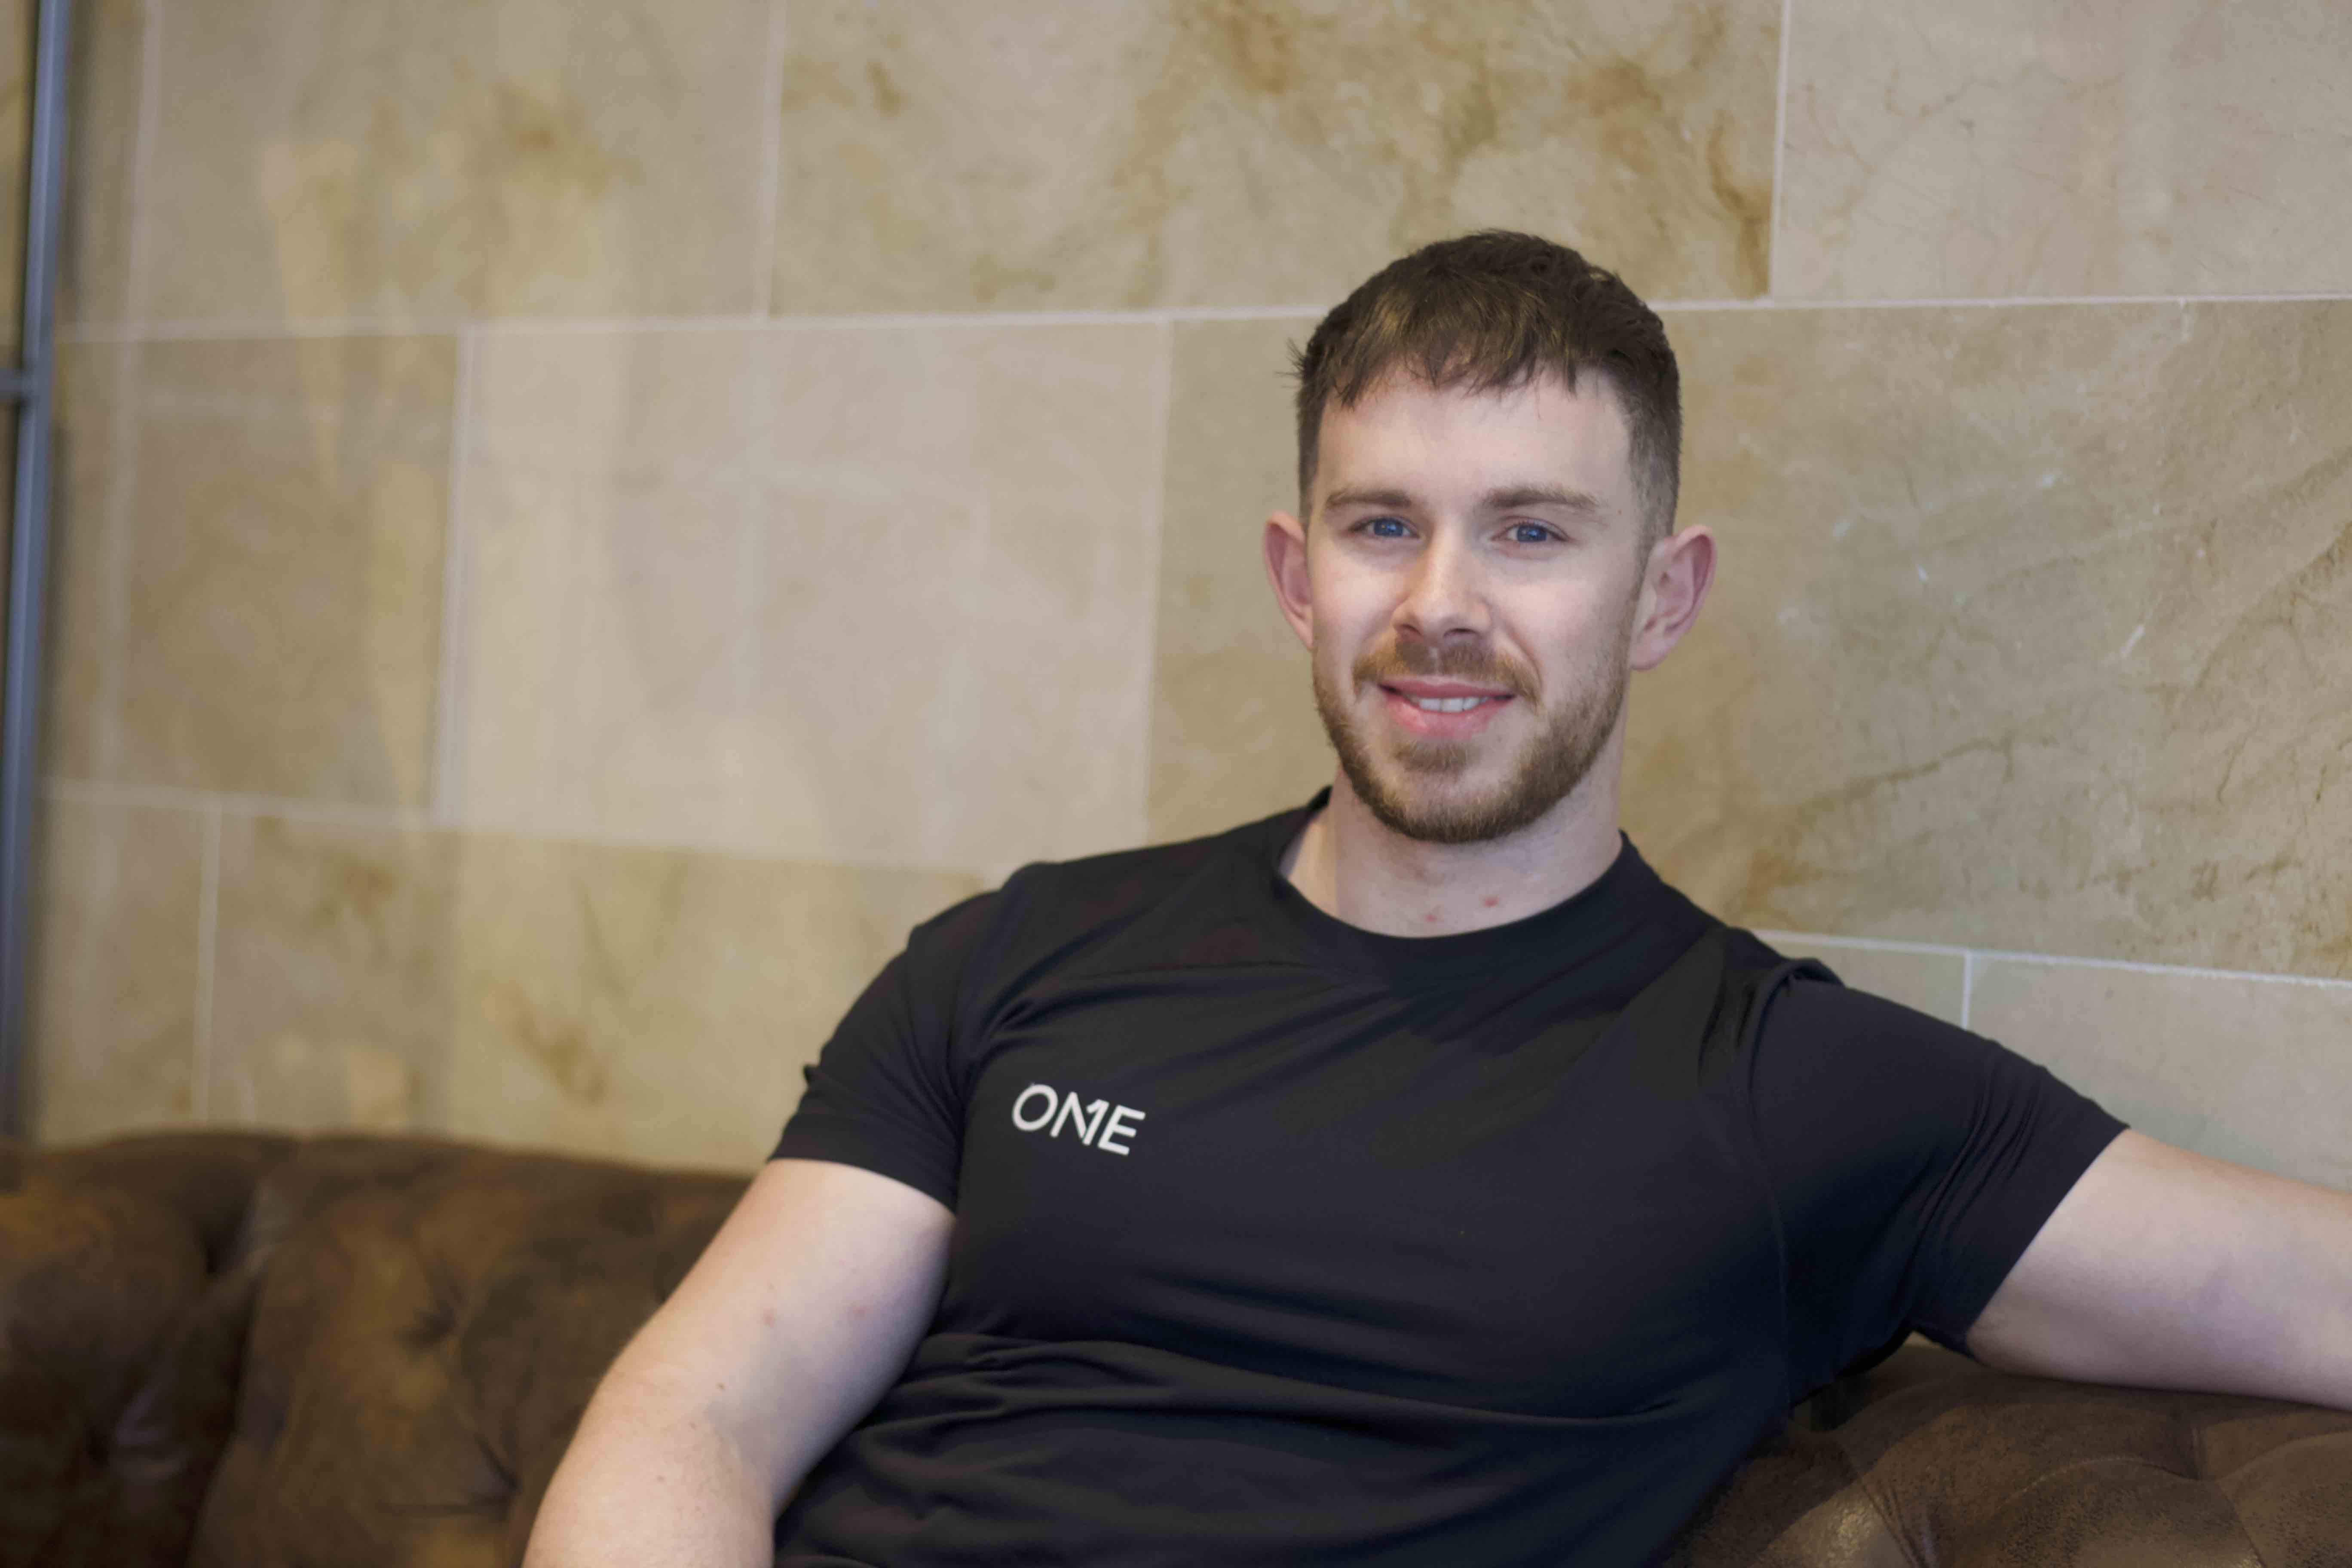 Meet the Trainers: Grahame – The Heart and Soul of ONE 3, Your Go-To Personal Trainer in Amsterdam